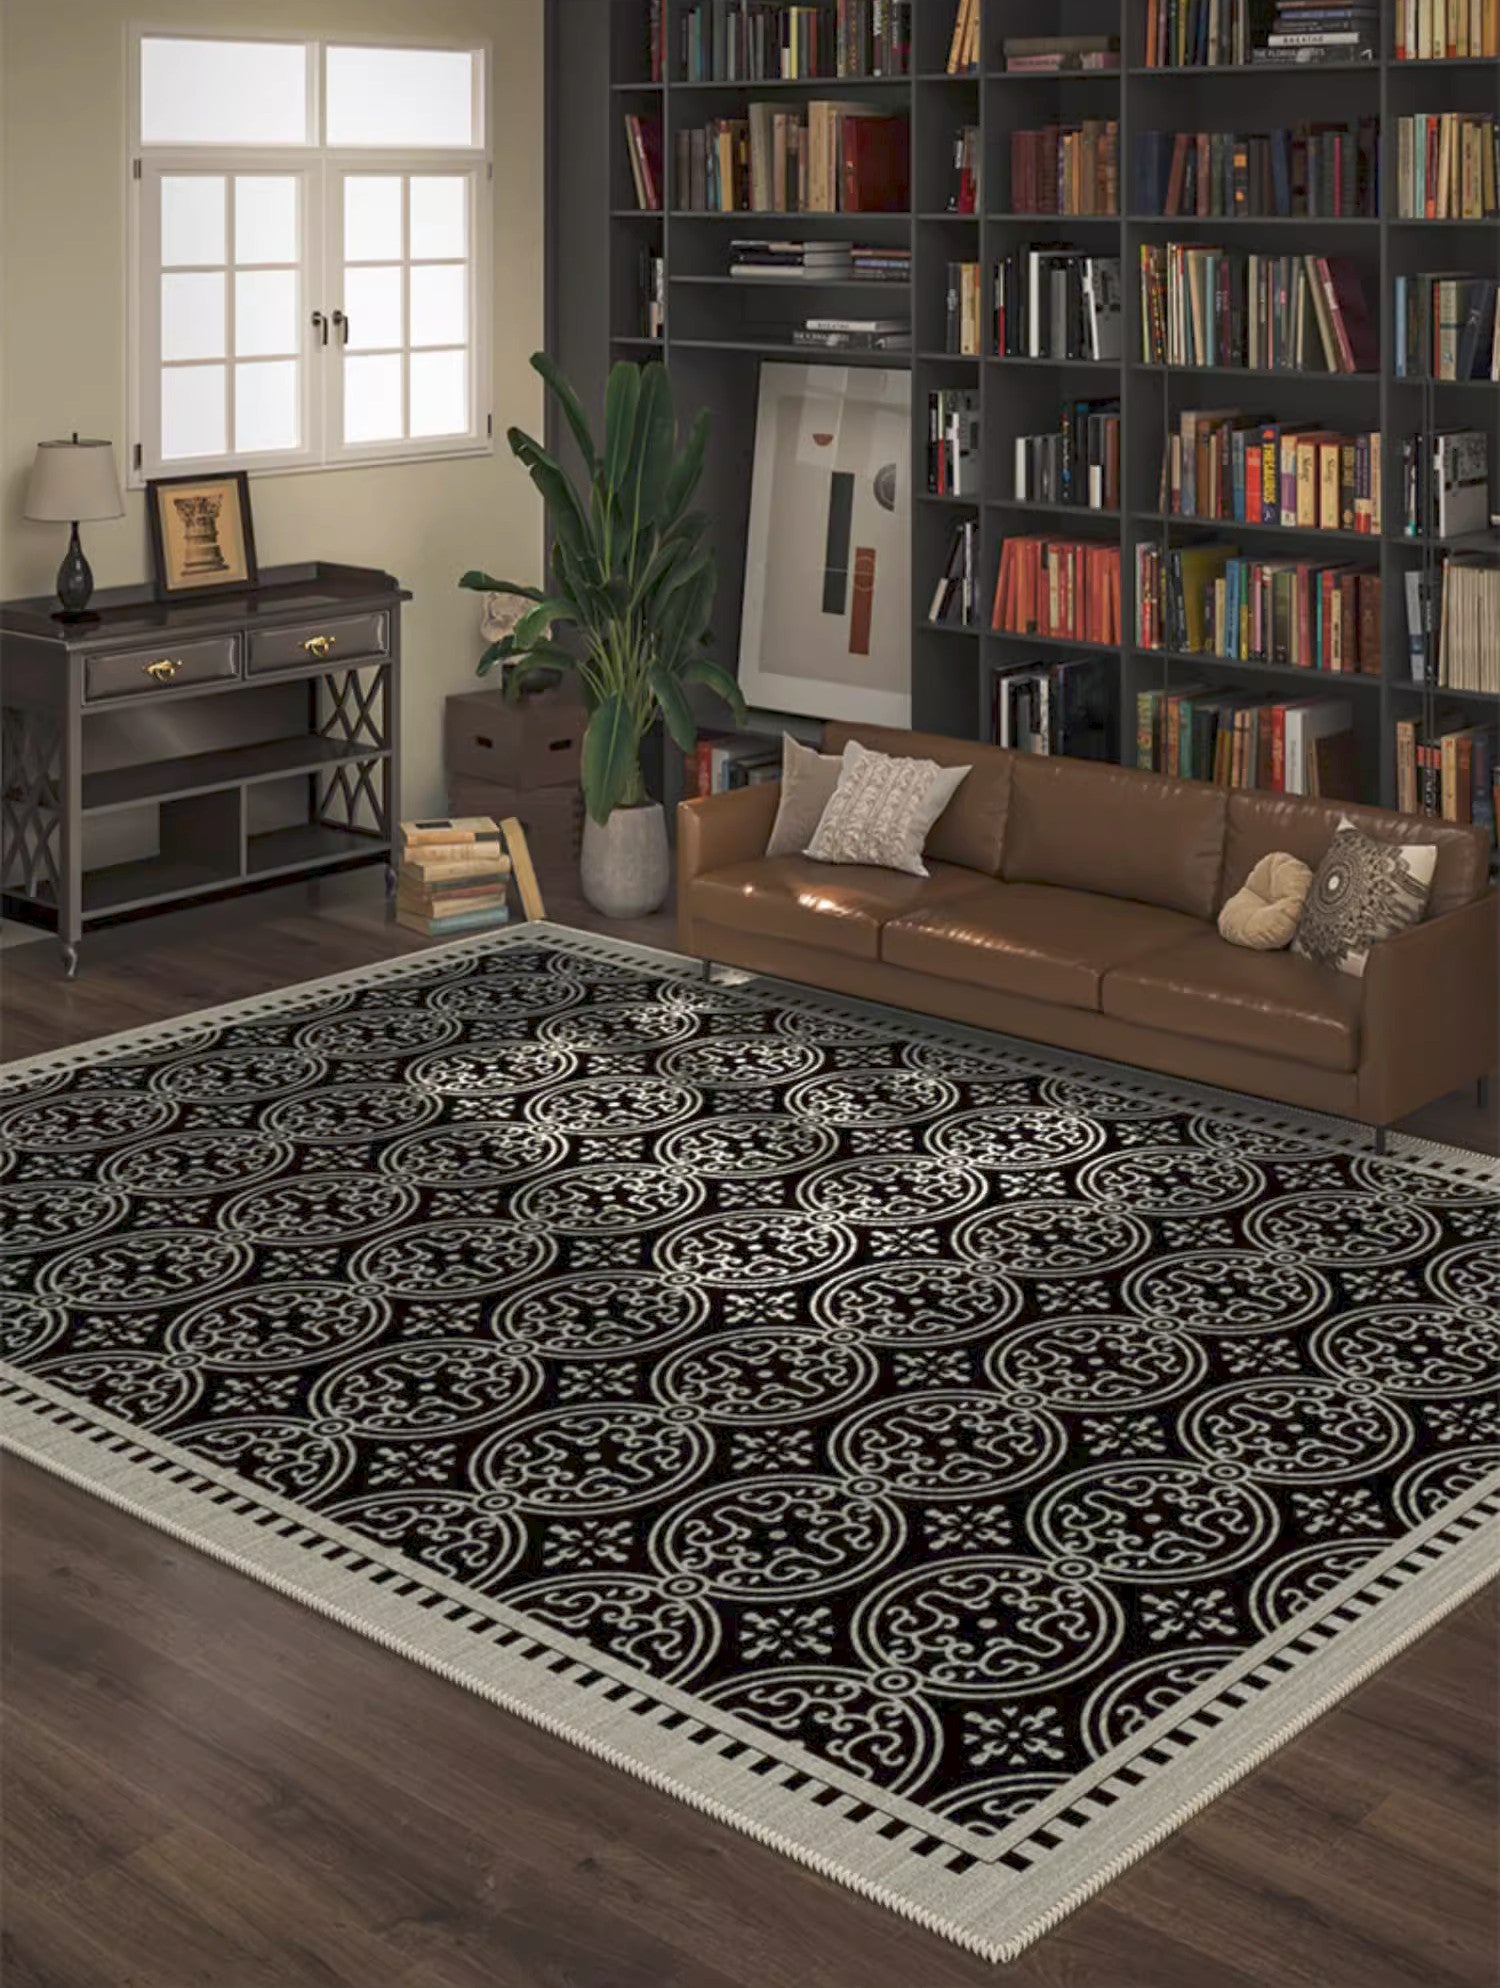 Bedroom Modern Floor Rugs, Contemporary Area Rugs under Sofa, Modern Area Rug for Living Room, Large Area Rugs for Office